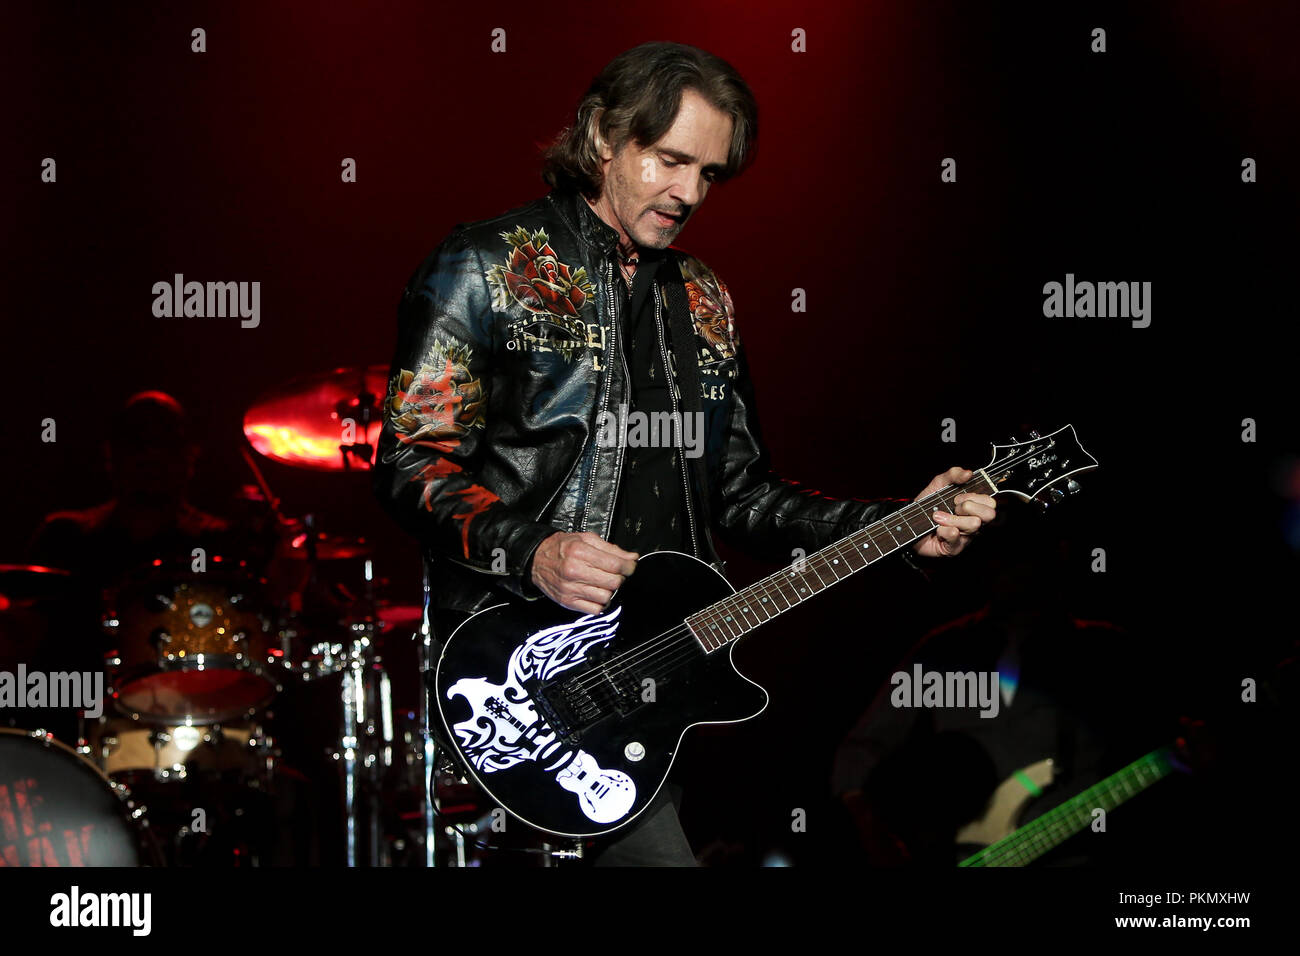 HUNTINGTON, NY - SEPT 13: Singer Rick Springfield performs in concert at the Paramount on September 13, 2018 in Huntington, New York. Credit: AKPhoto/Alamy Live News Stock Photo